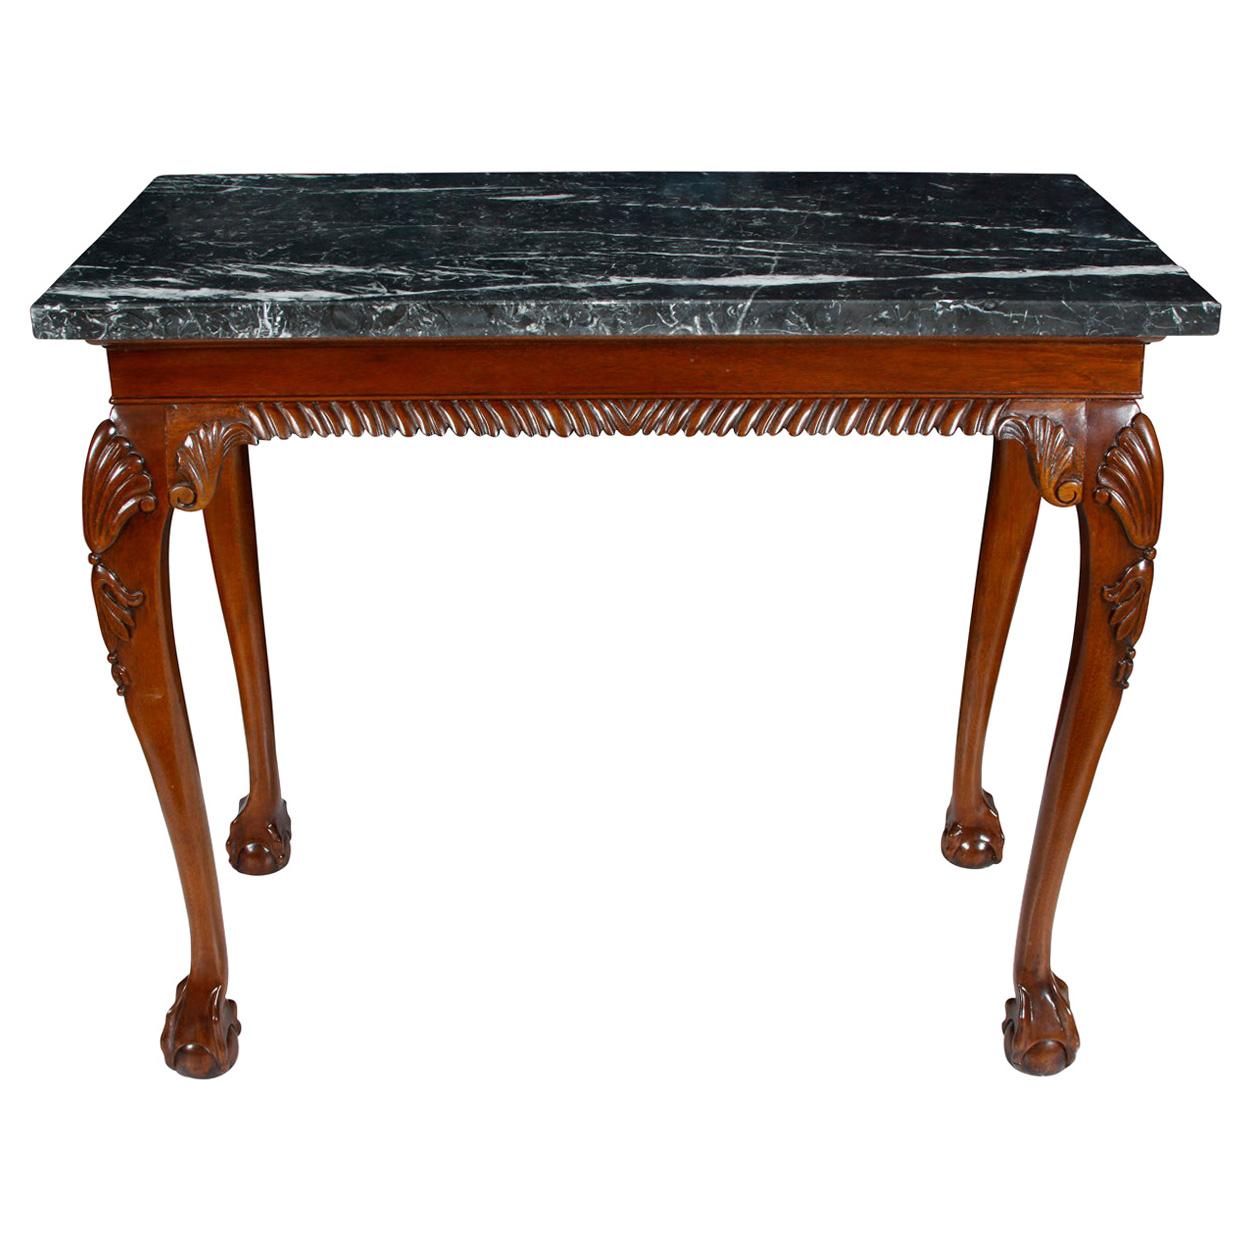 George III Style Marble Top Walnut Console